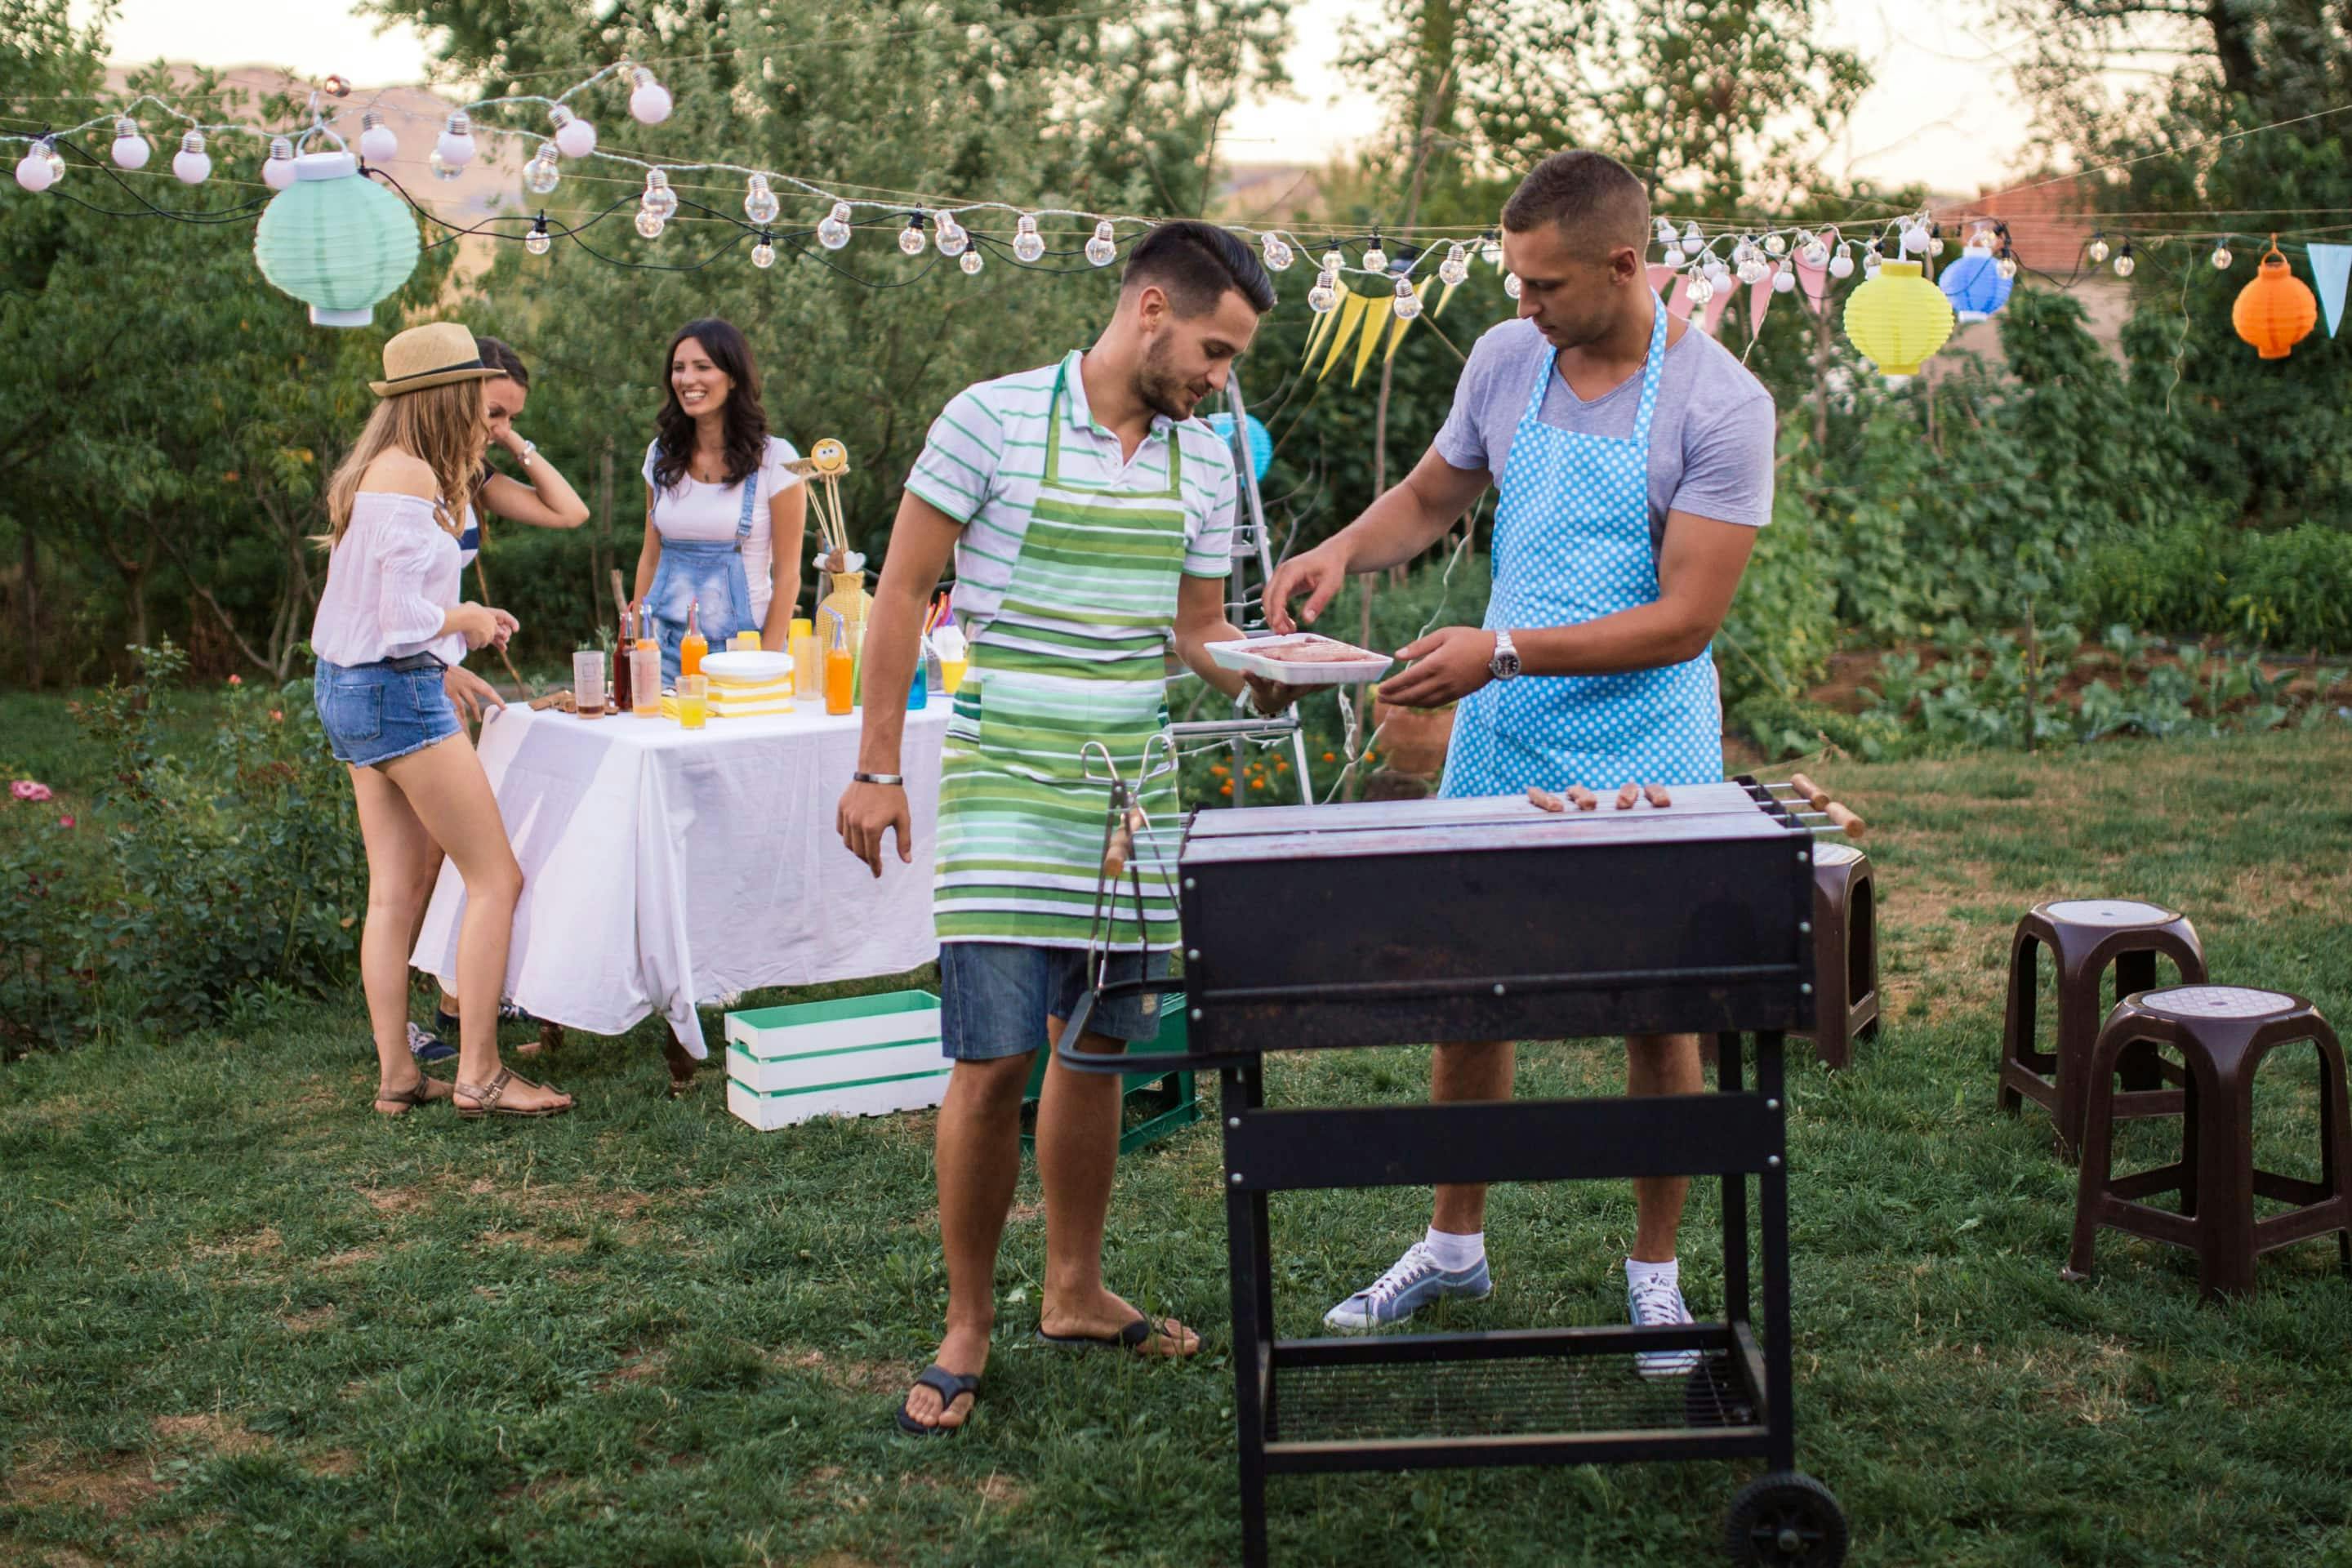 Get all the tips and tricks for your BBQ party.